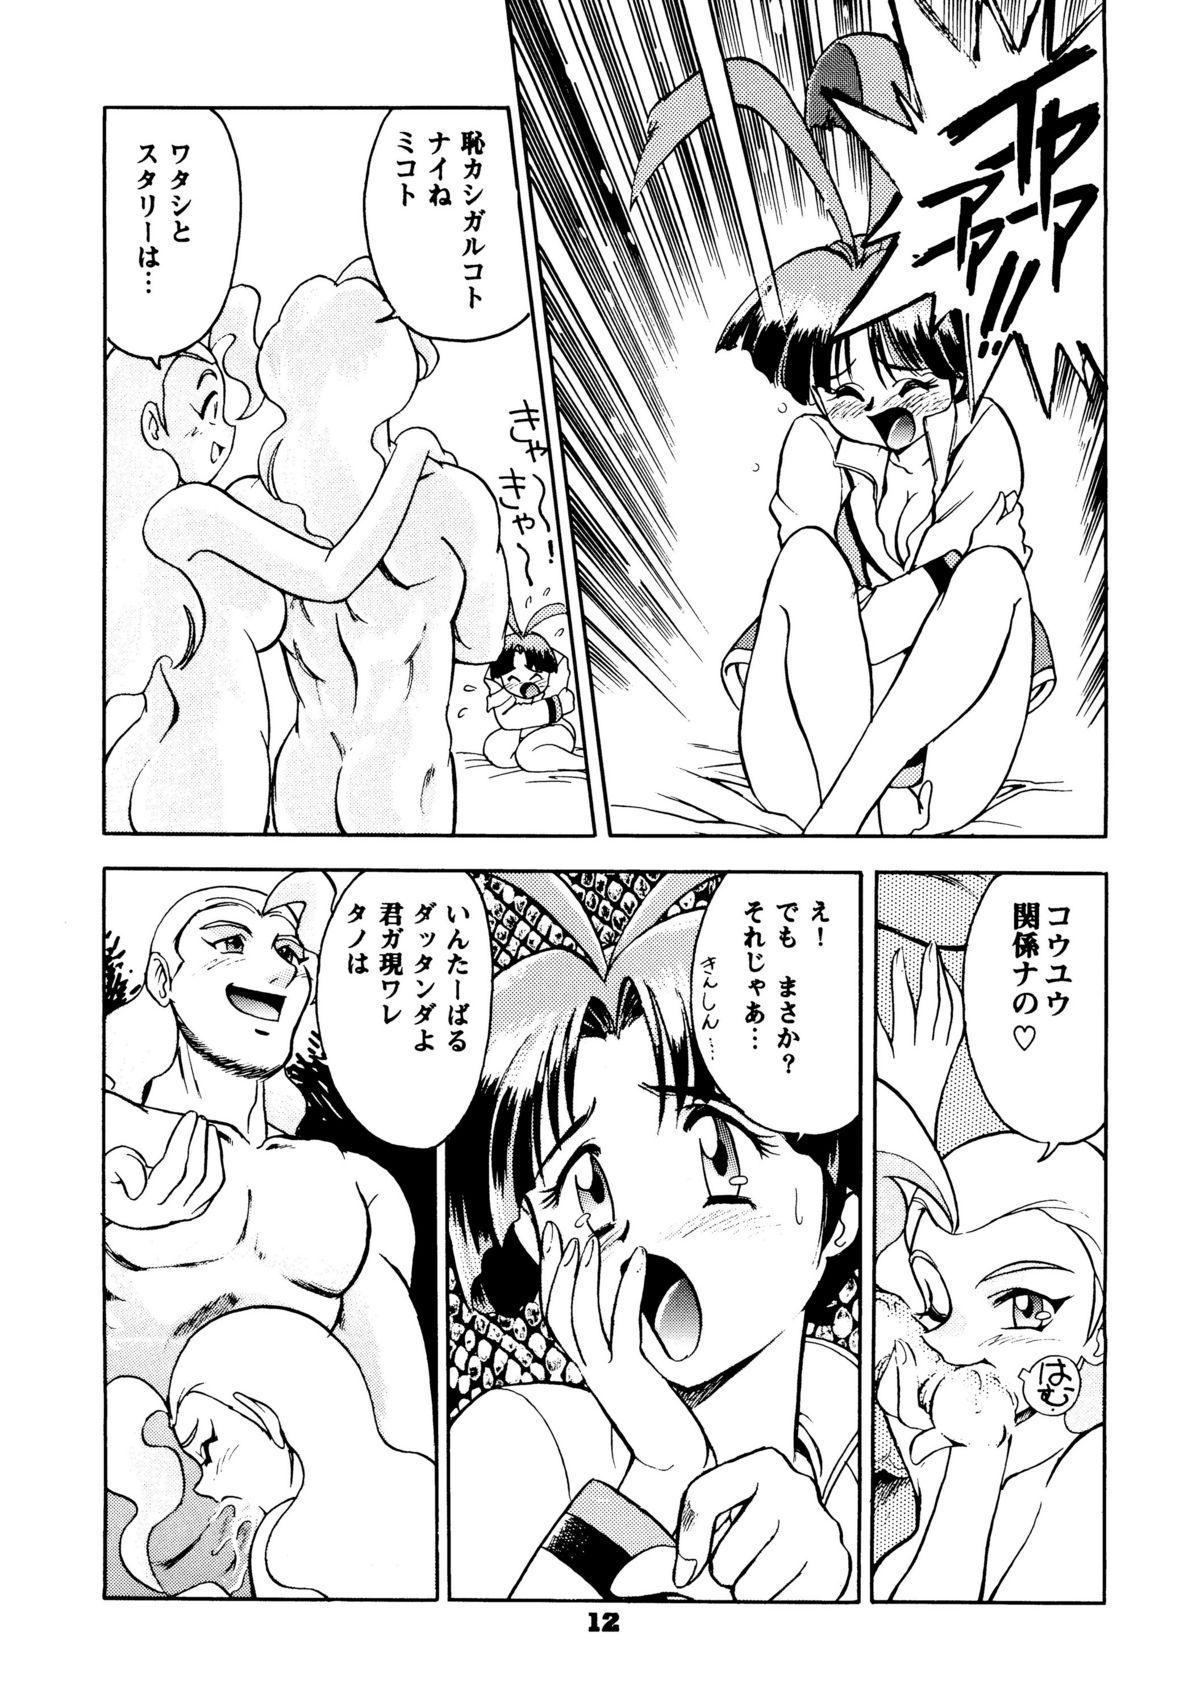 Famosa Your Eye's Only - Neon genesis evangelion Gaogaigar Cutey honey Nudes - Page 11